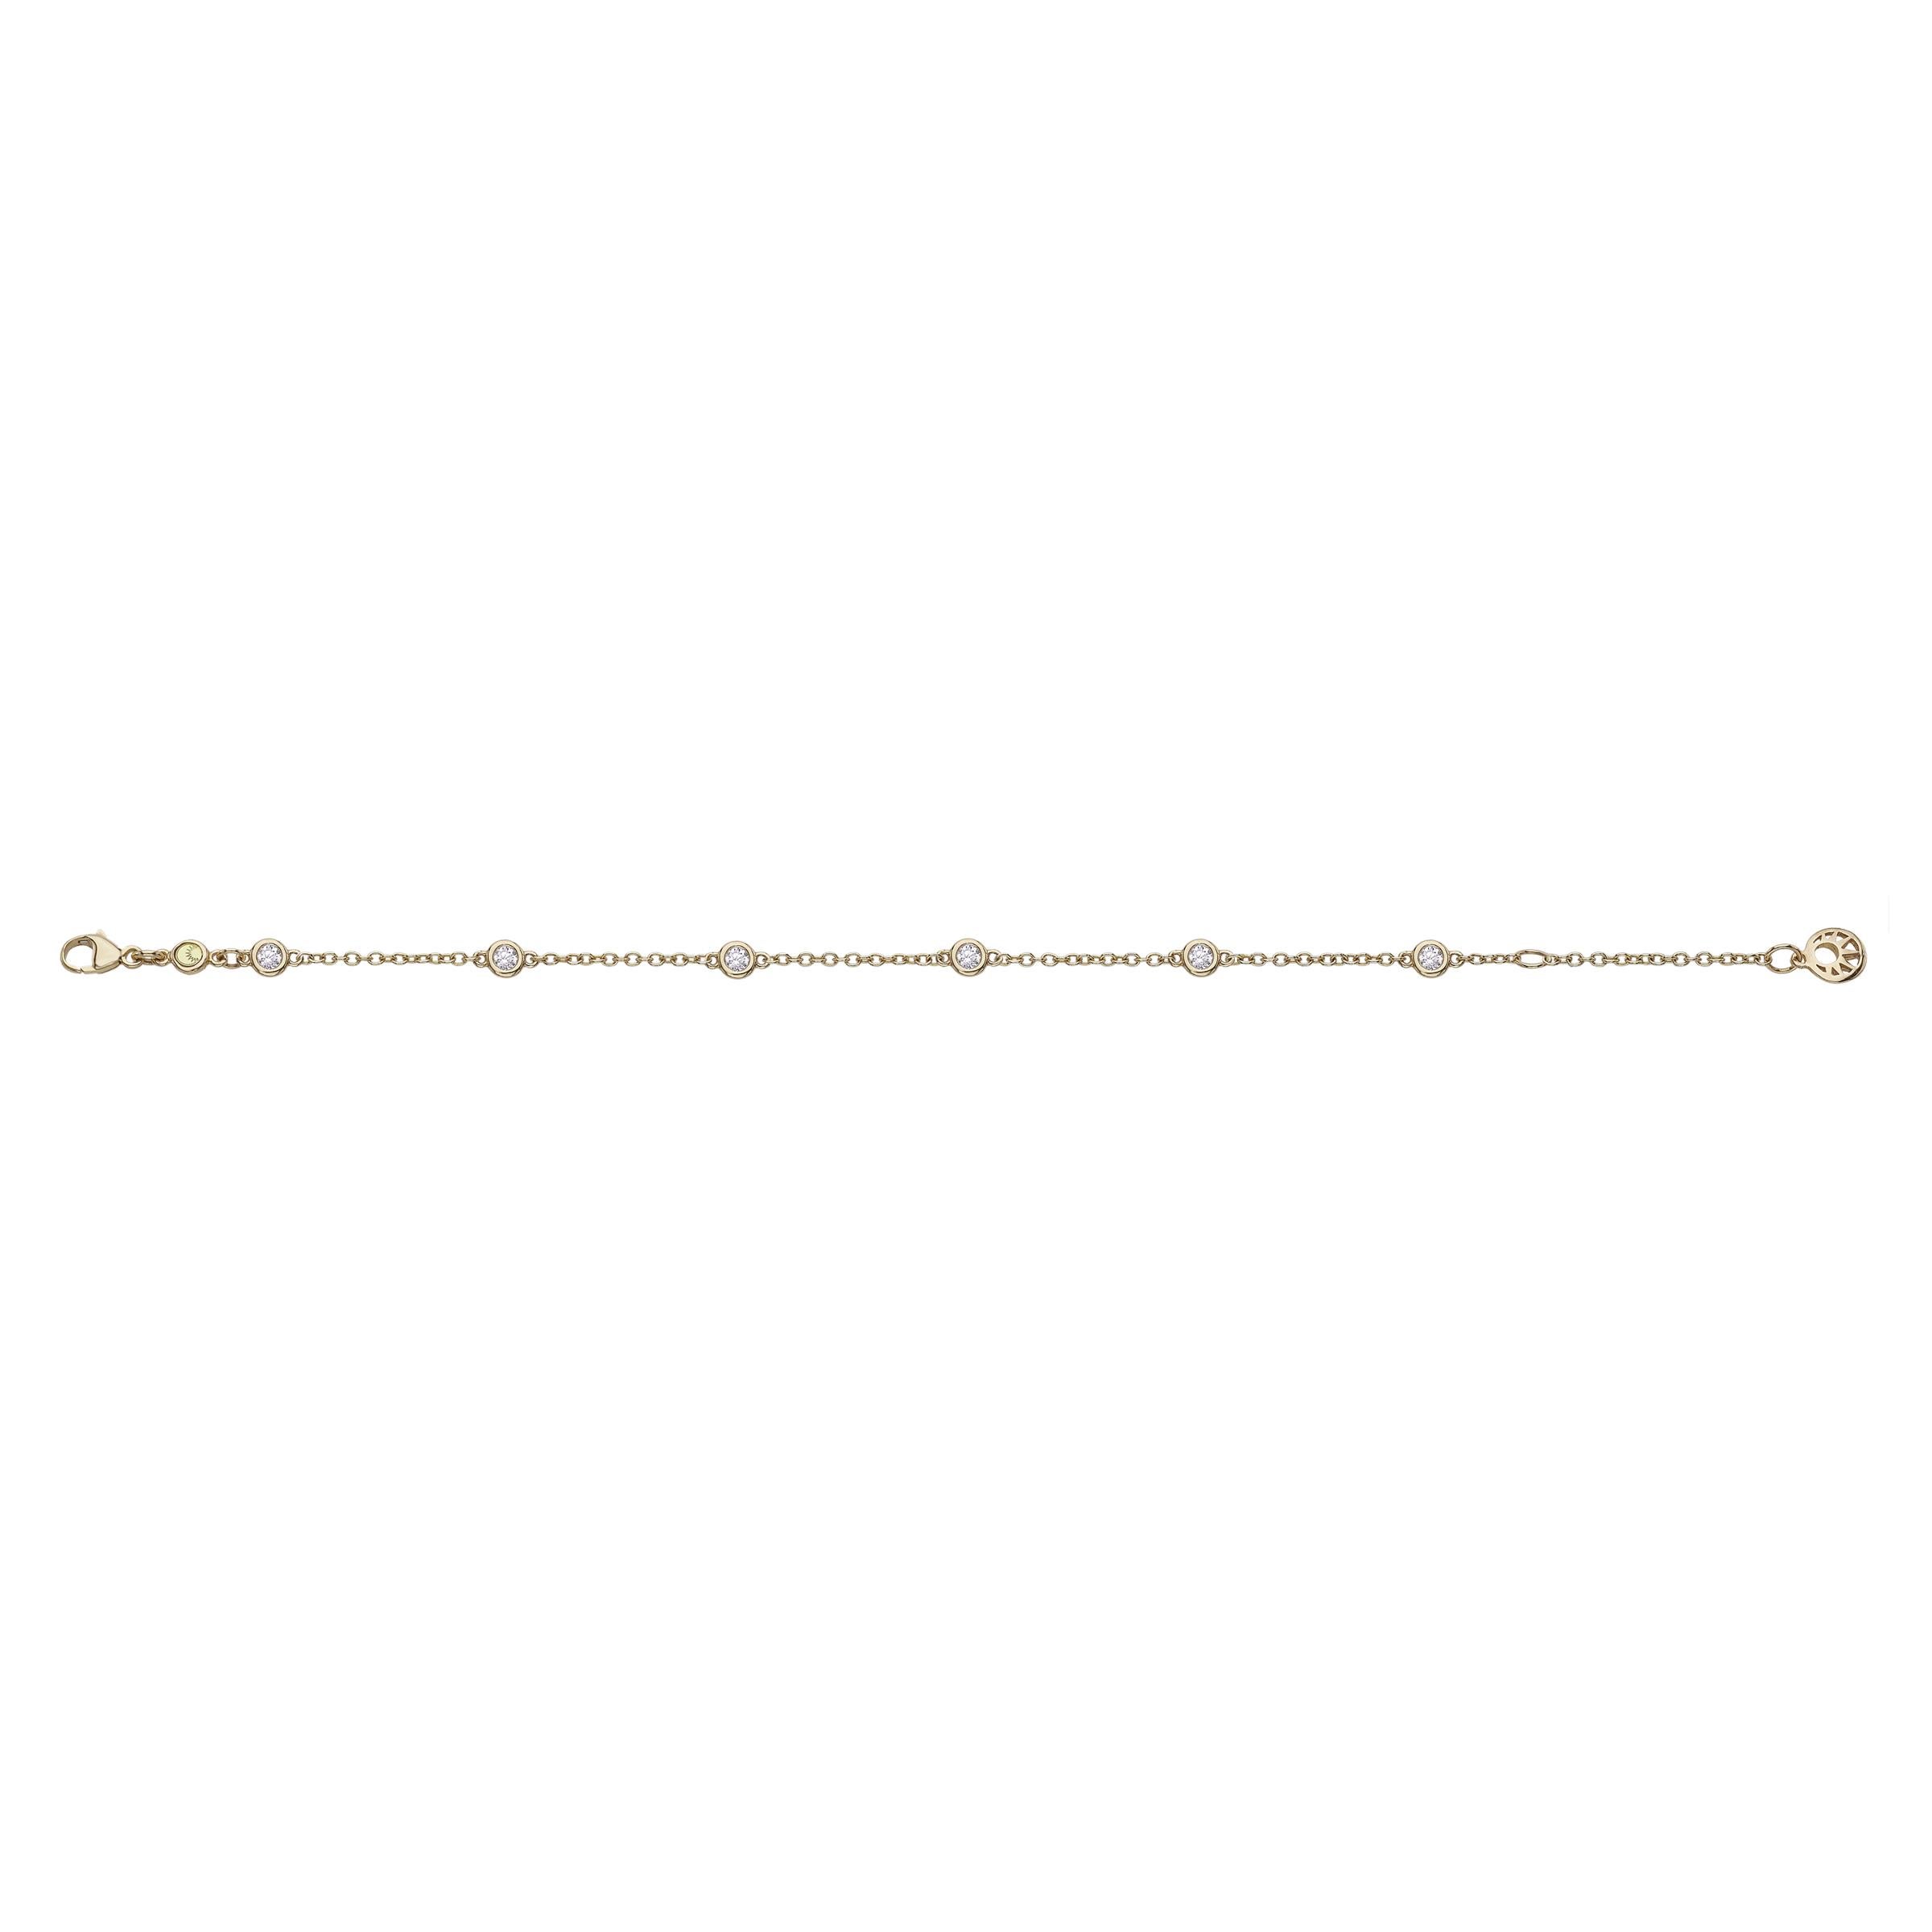 18 Karat Yellow Gold Diamond Chain Bracelet featuring 6 round brilliant cut diamonds 0,55 carats total. 18 cm to 16 cm adjustable chain 

This beautiful classic design can be worn as a daywear piece or you can dress it up to wear to special events